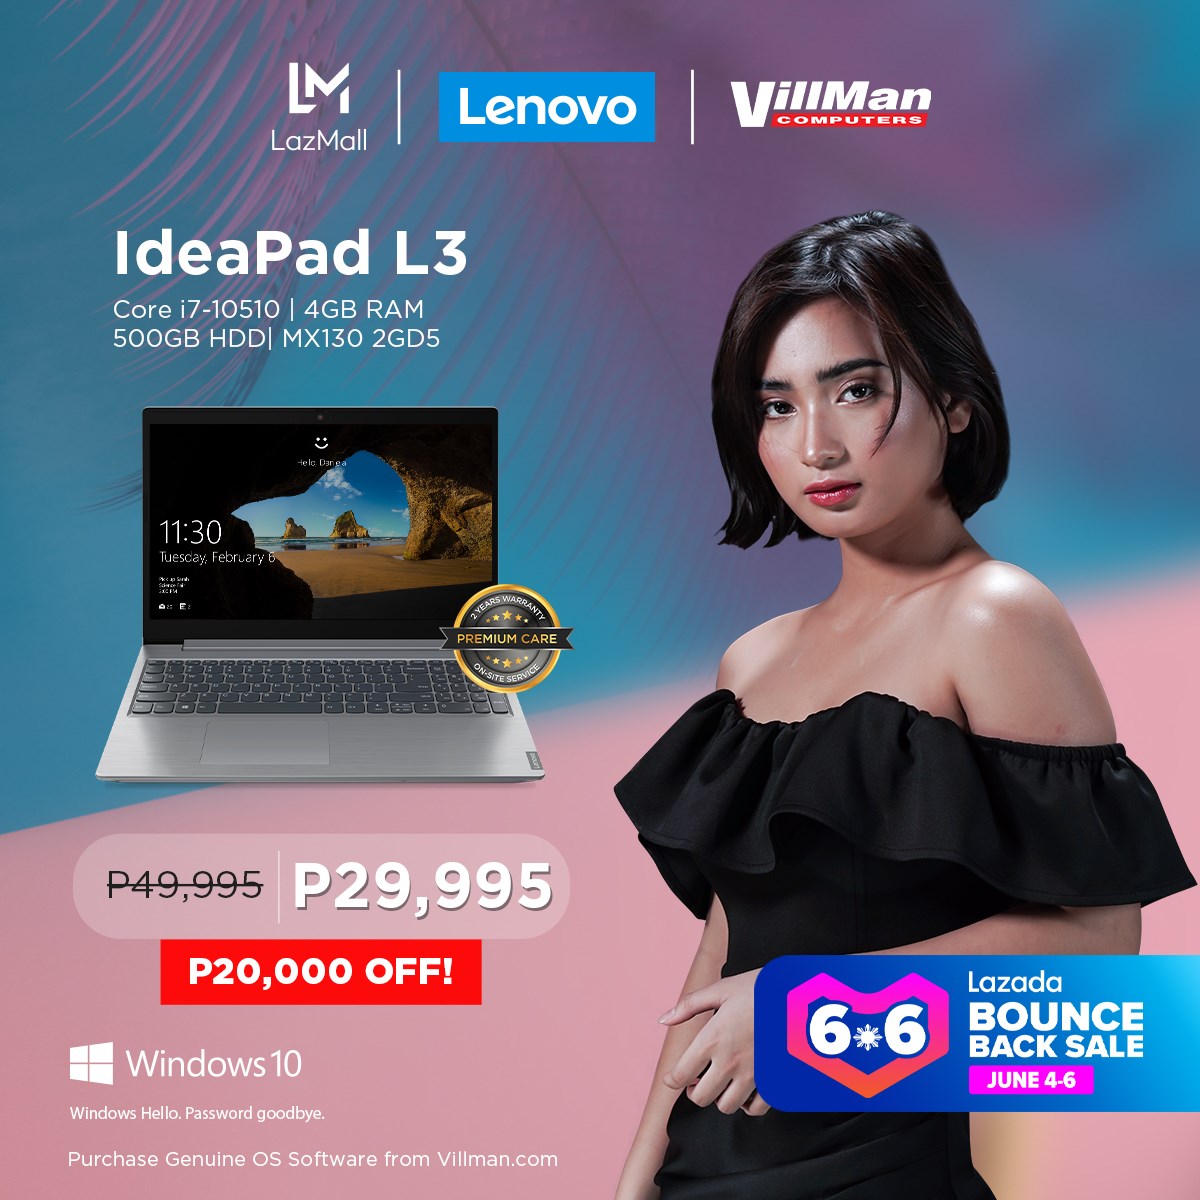 Get the Lenovo IdeaPad L3 at Massively Discounted Prices at the Lazada 6.6 Bounce Back Sale!